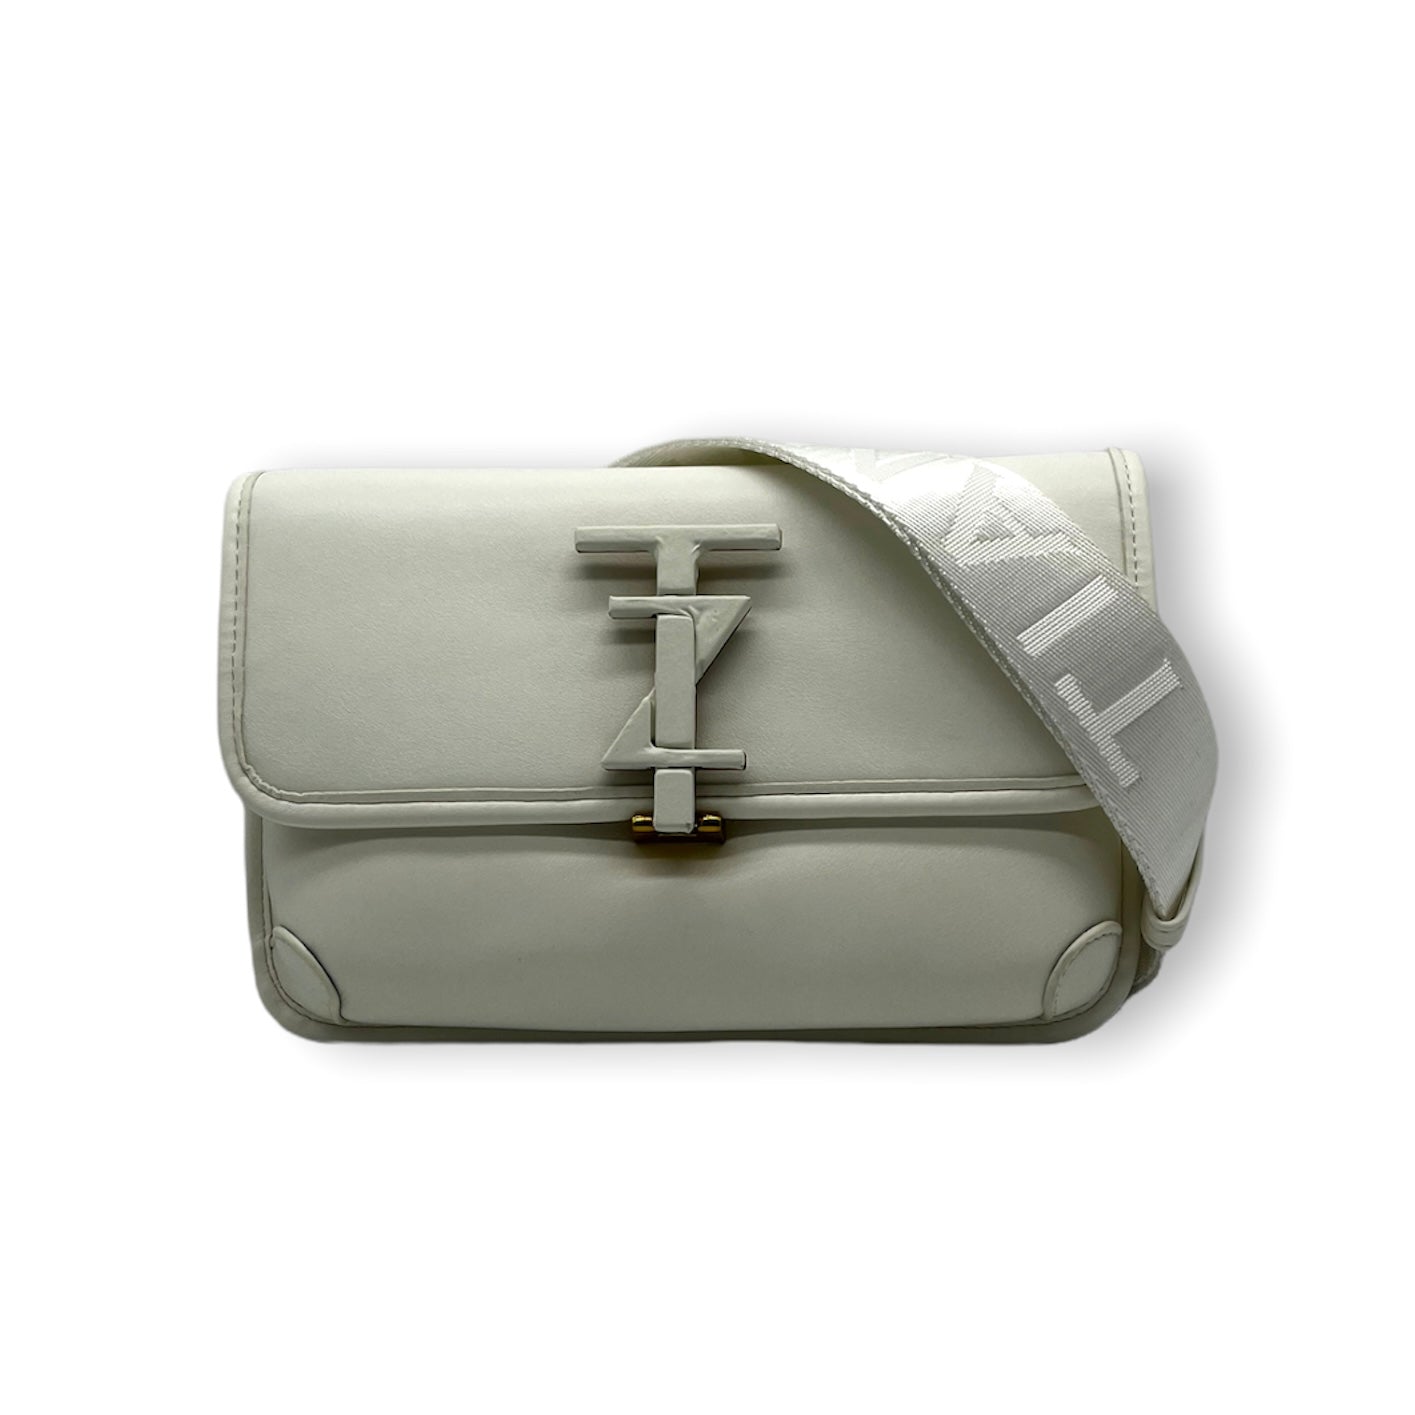 TAFARI leather chest bag and Beltpack- Ivory